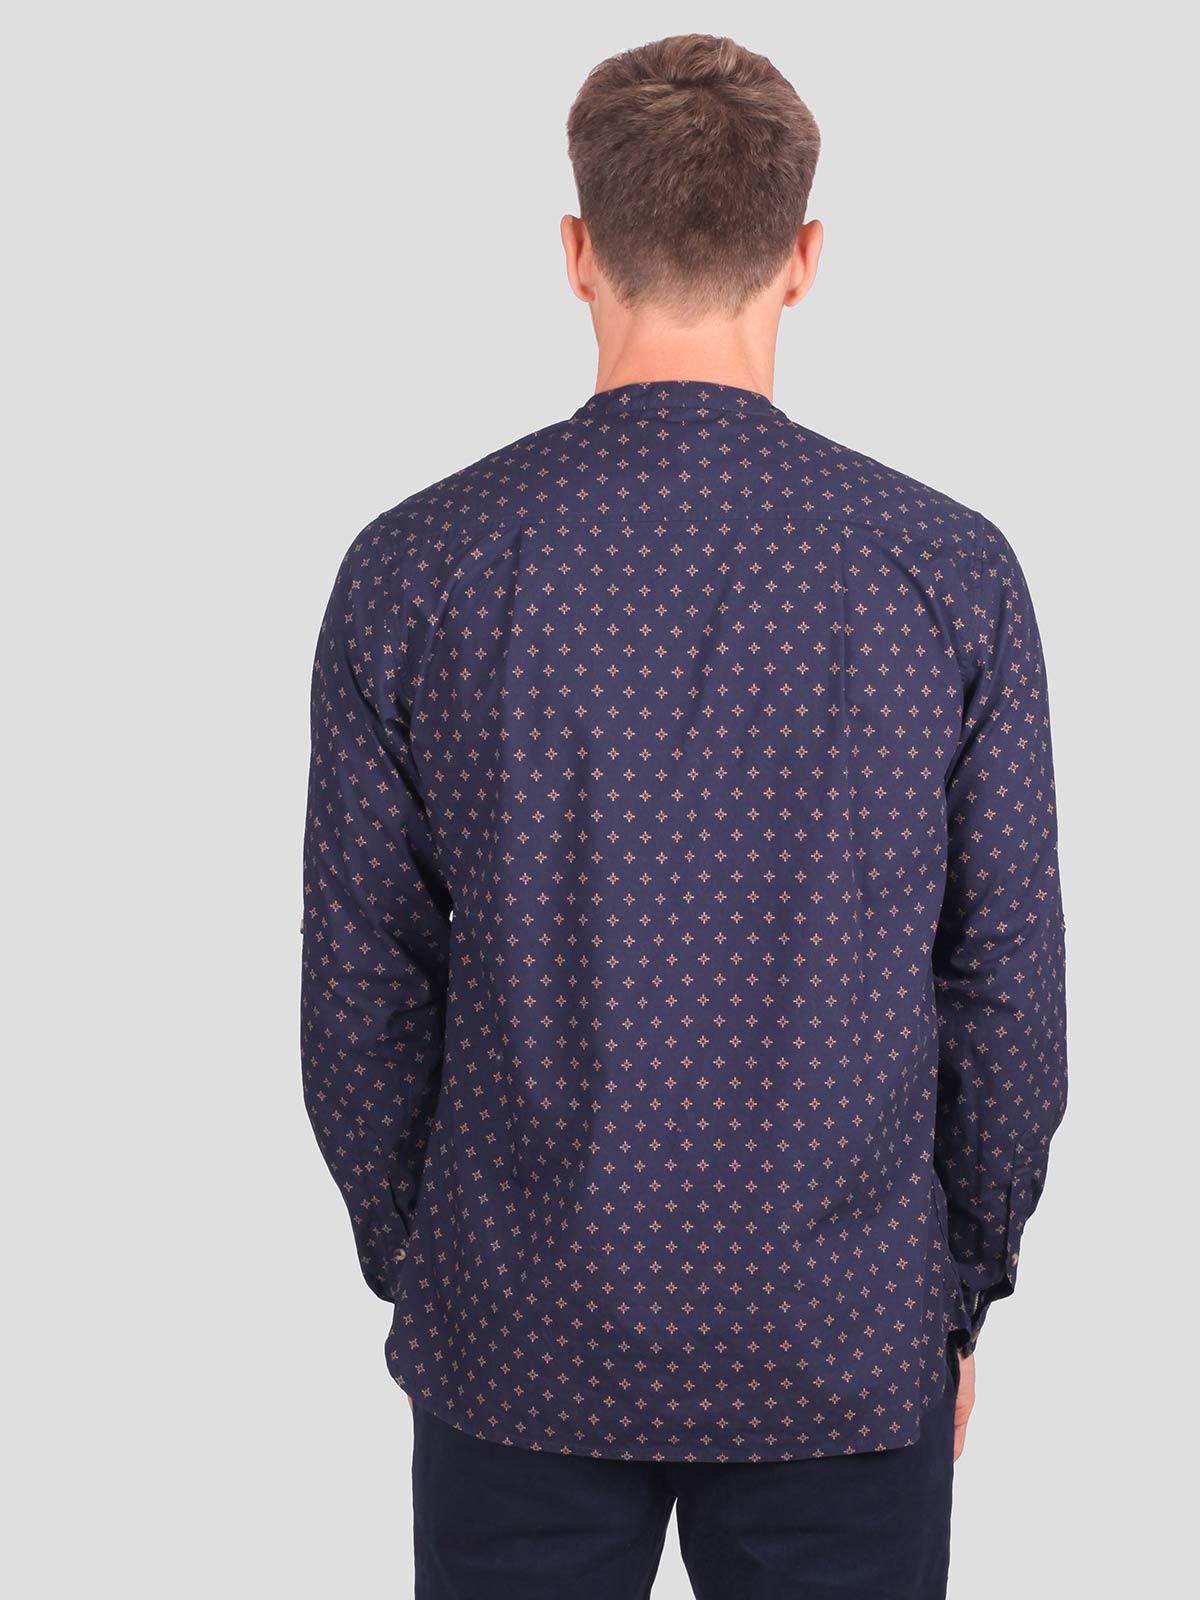 Chaucer Fairtrade Organic Cotton Long Sleeve Printed Shirt - Thought Clothing UK